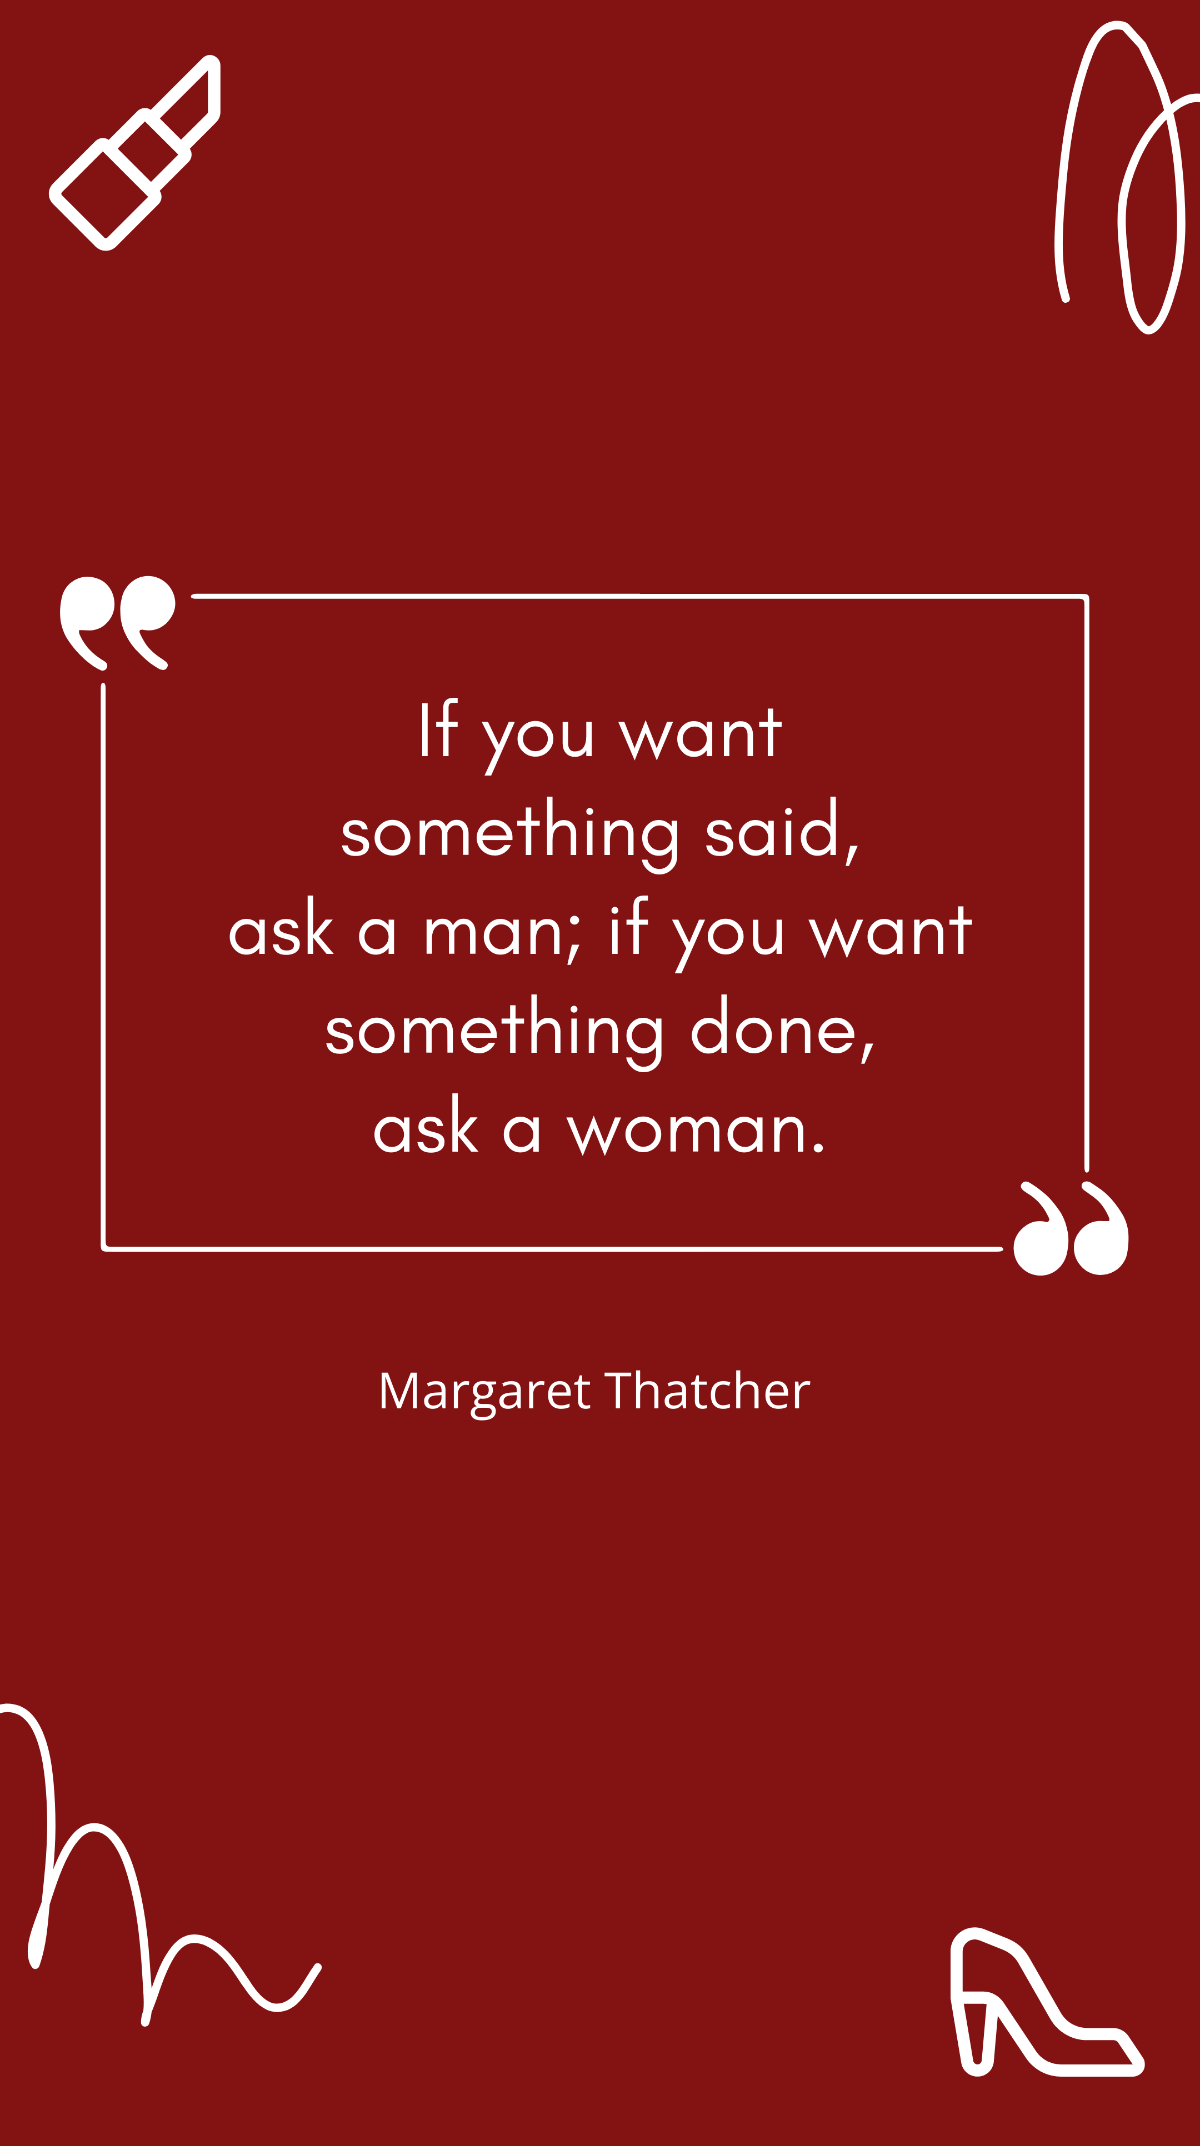 Margaret Thatcher - “If you want something said, ask a man; if you want something done, ask a woman.